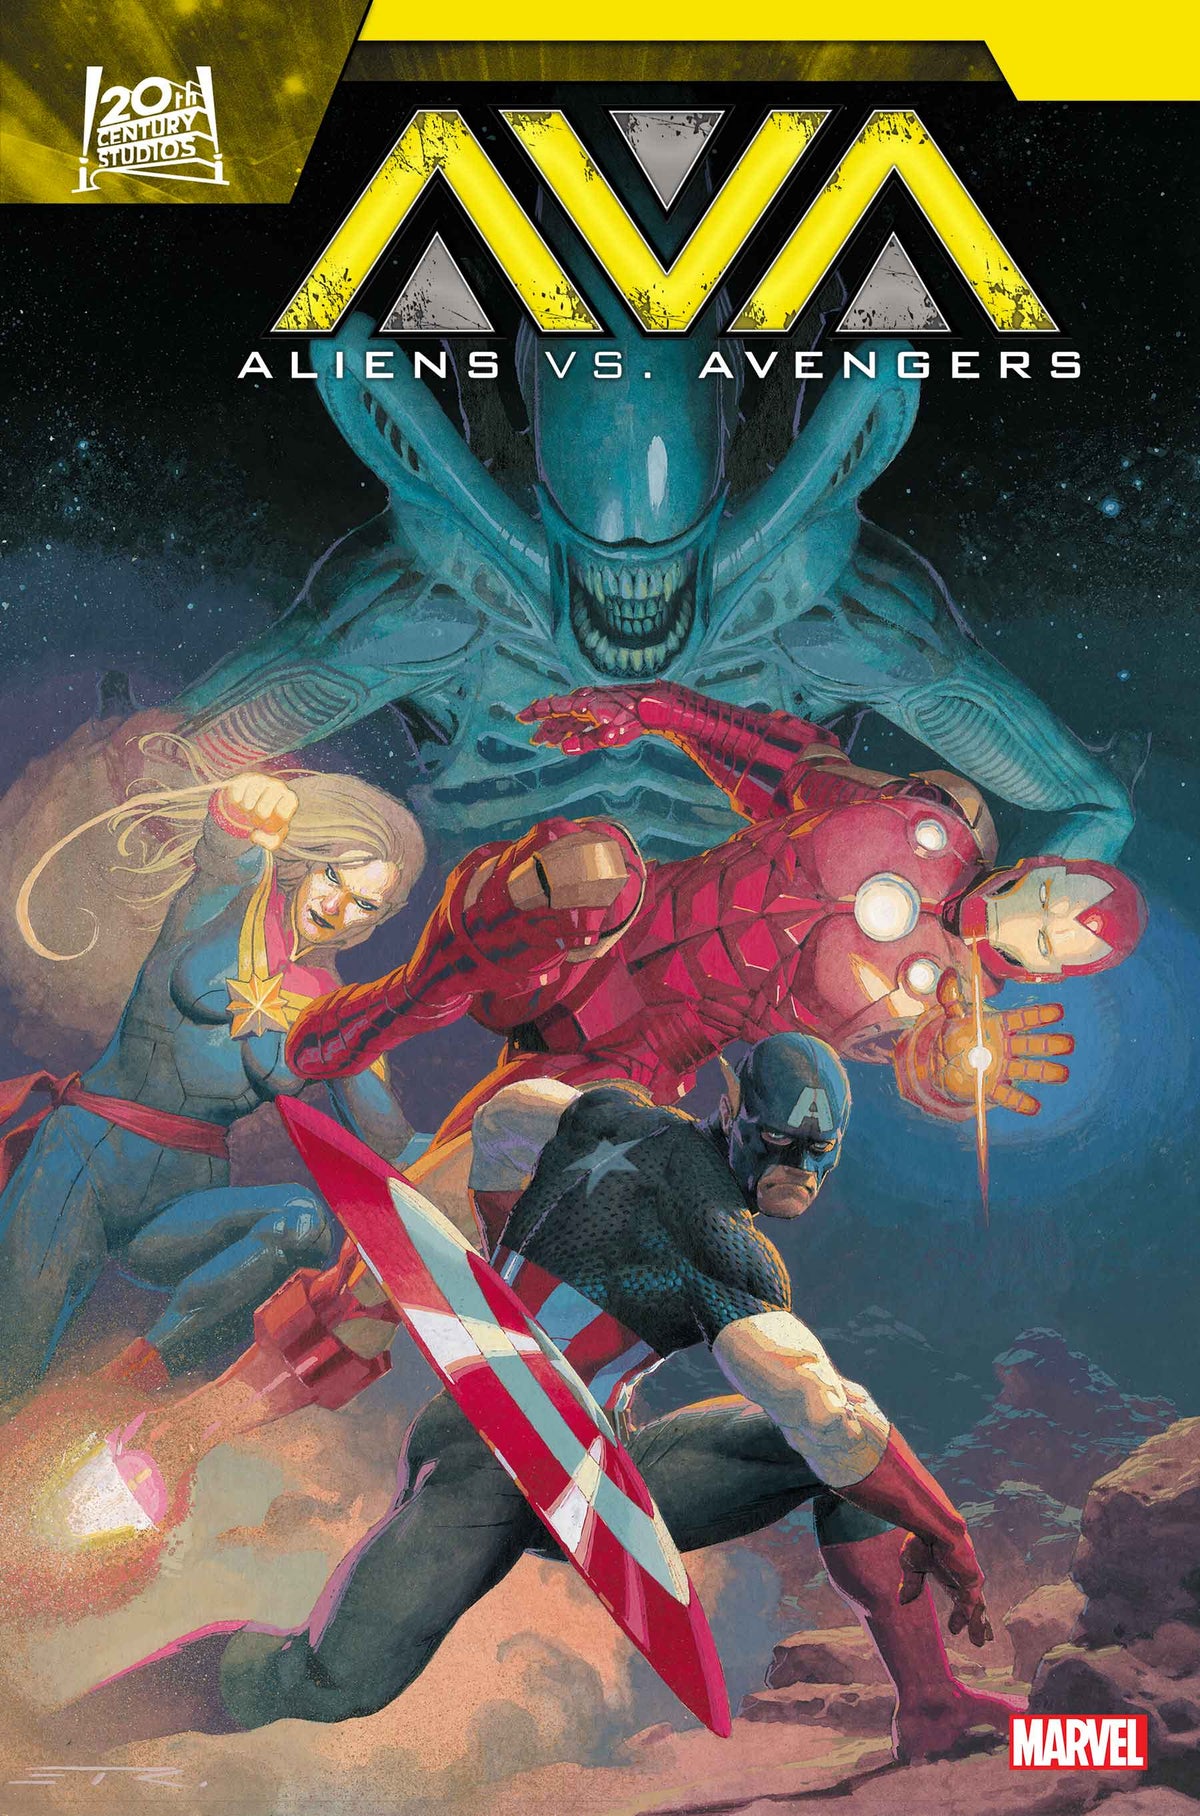 ALIENS VS. AVENGERS #1 - EARTH'S MIGHTIEST MARINES BUNDLE - GET ALL THE COVERS!!!